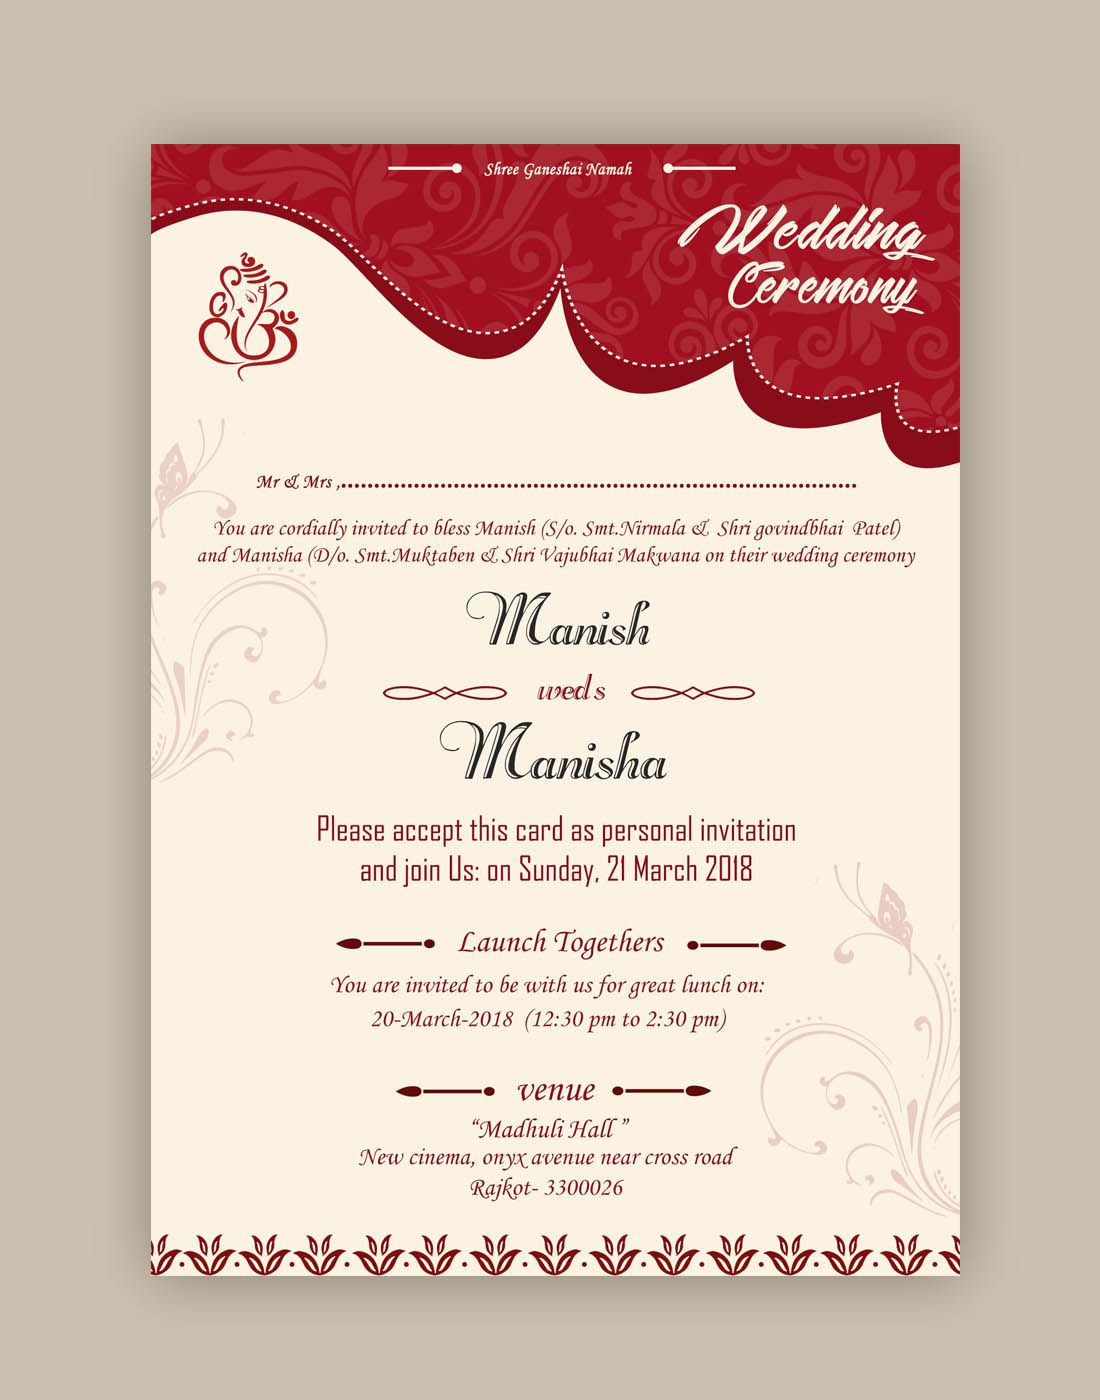 Free Wedding Card Psd Templates In 2019 | Free Wedding Cards With Regard To Free E Wedding Invitation Card Templates